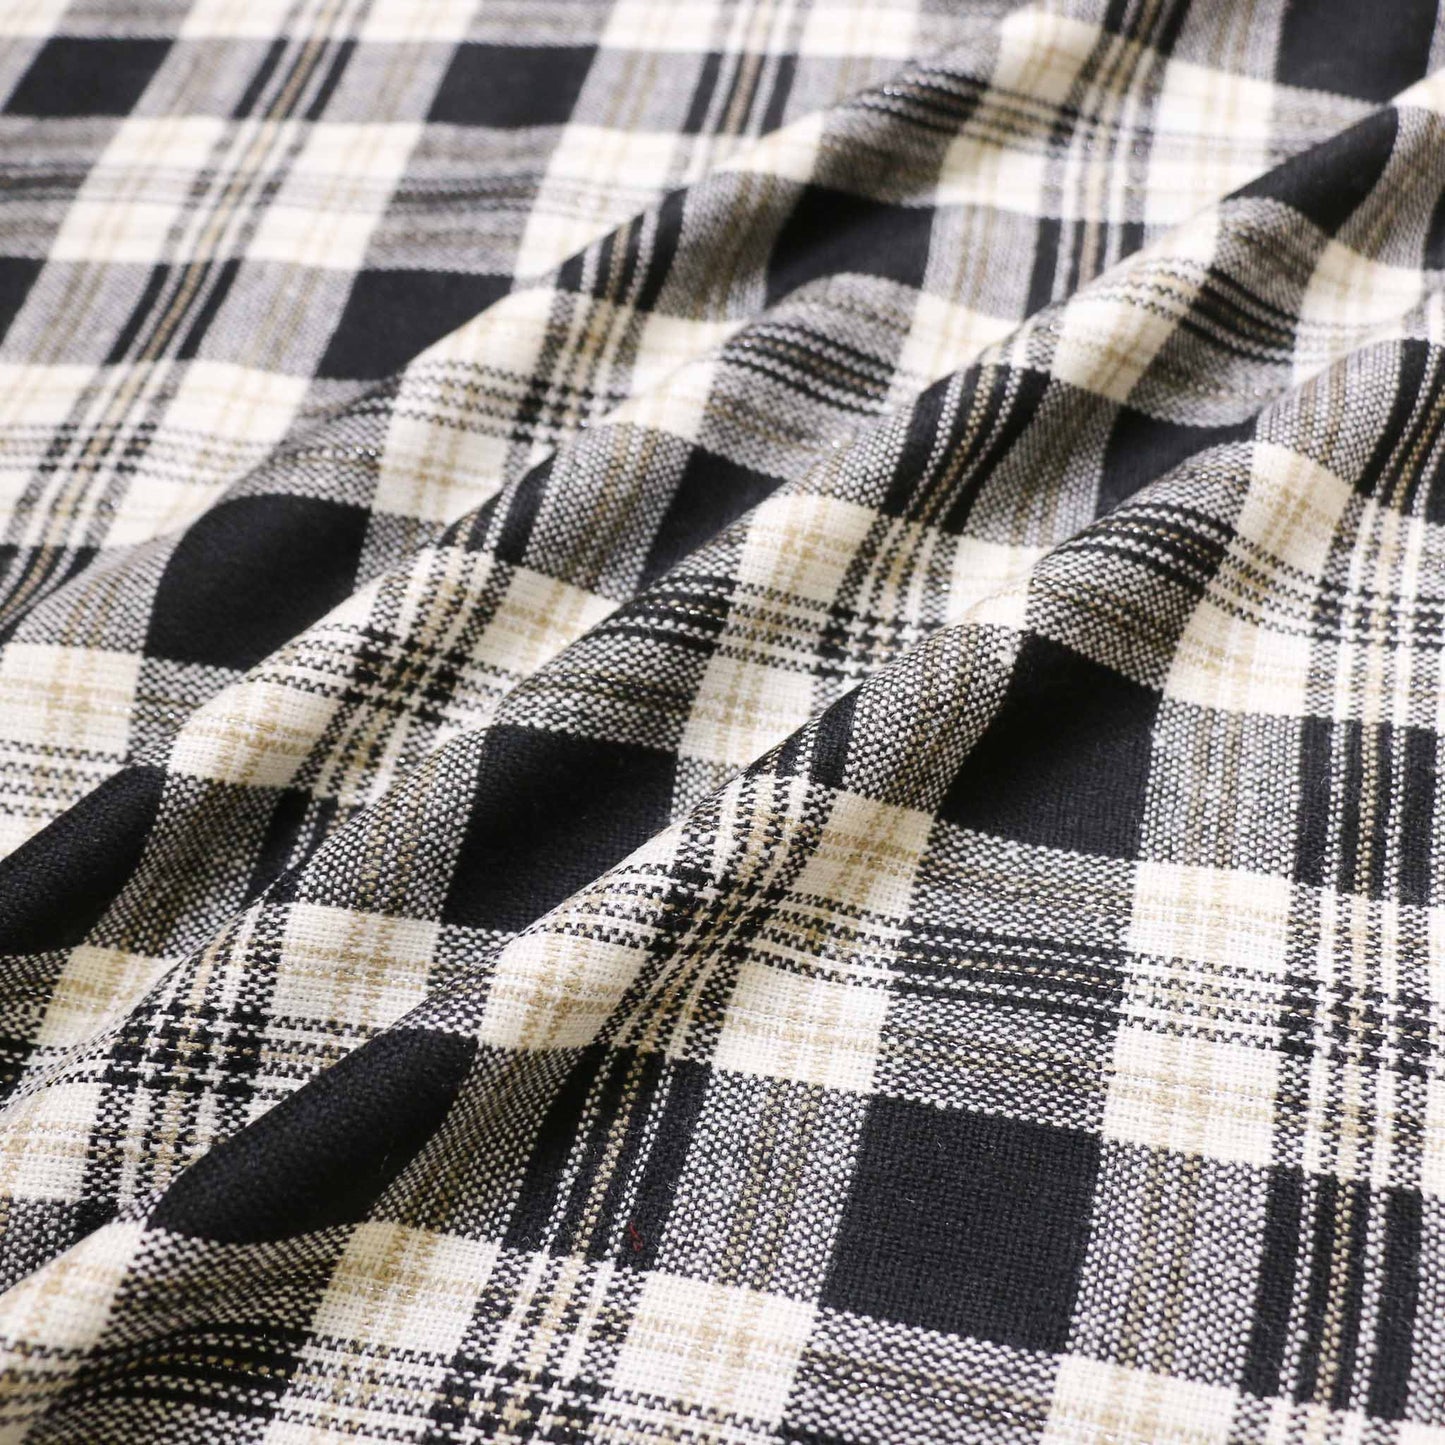 white wool voltaire fabric with khaki and black check pattern dressmaking fabric with check pattern